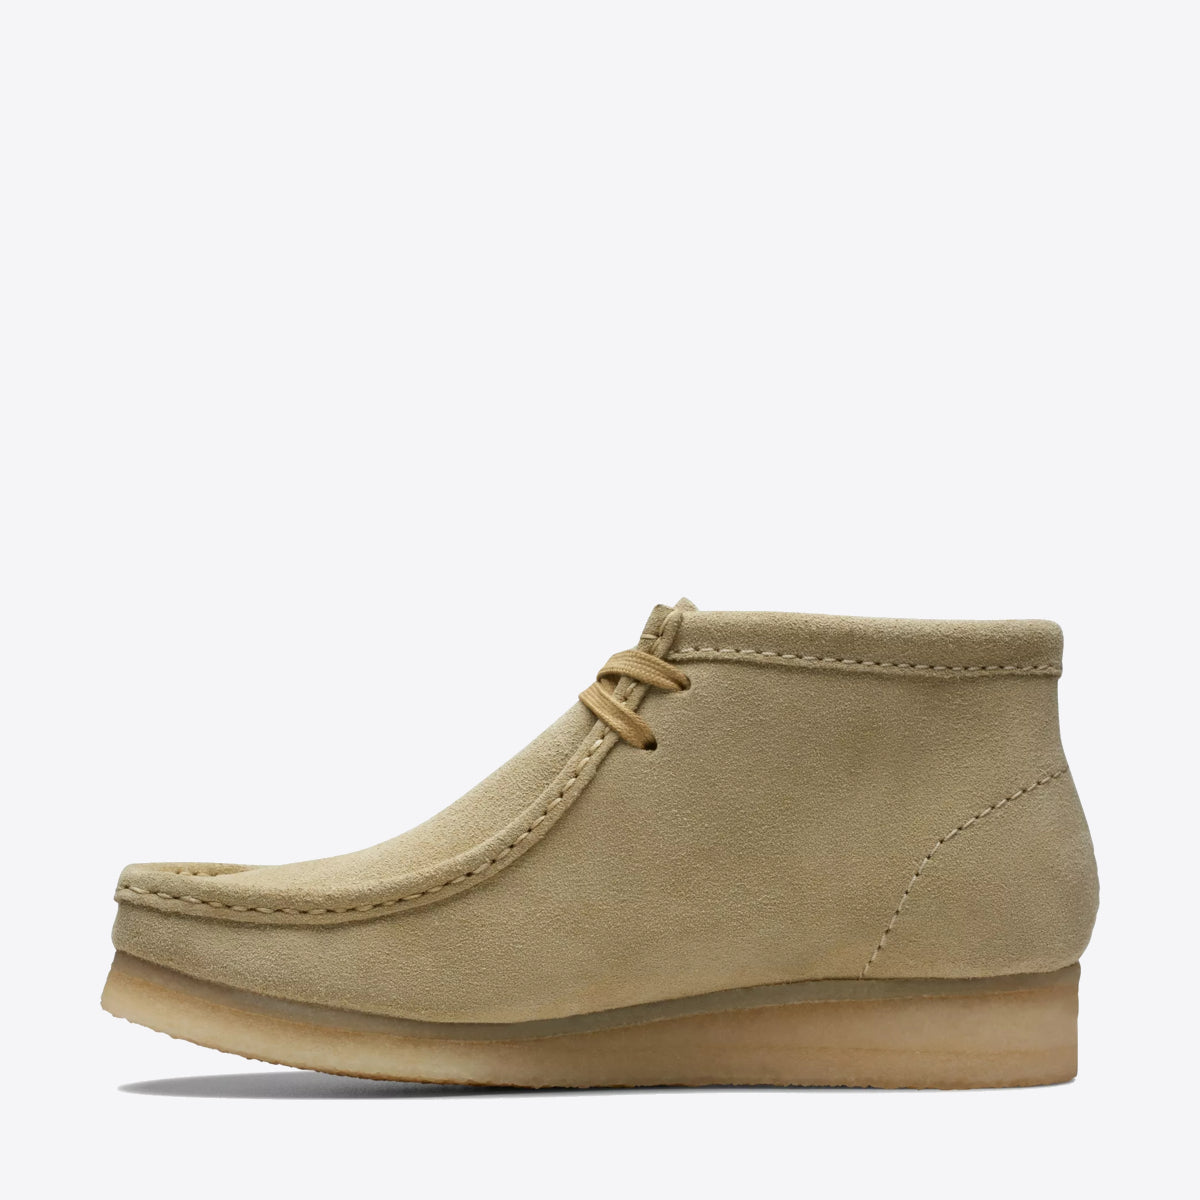 CLARKS Wallabee Boot Suede W Maple - Image 2